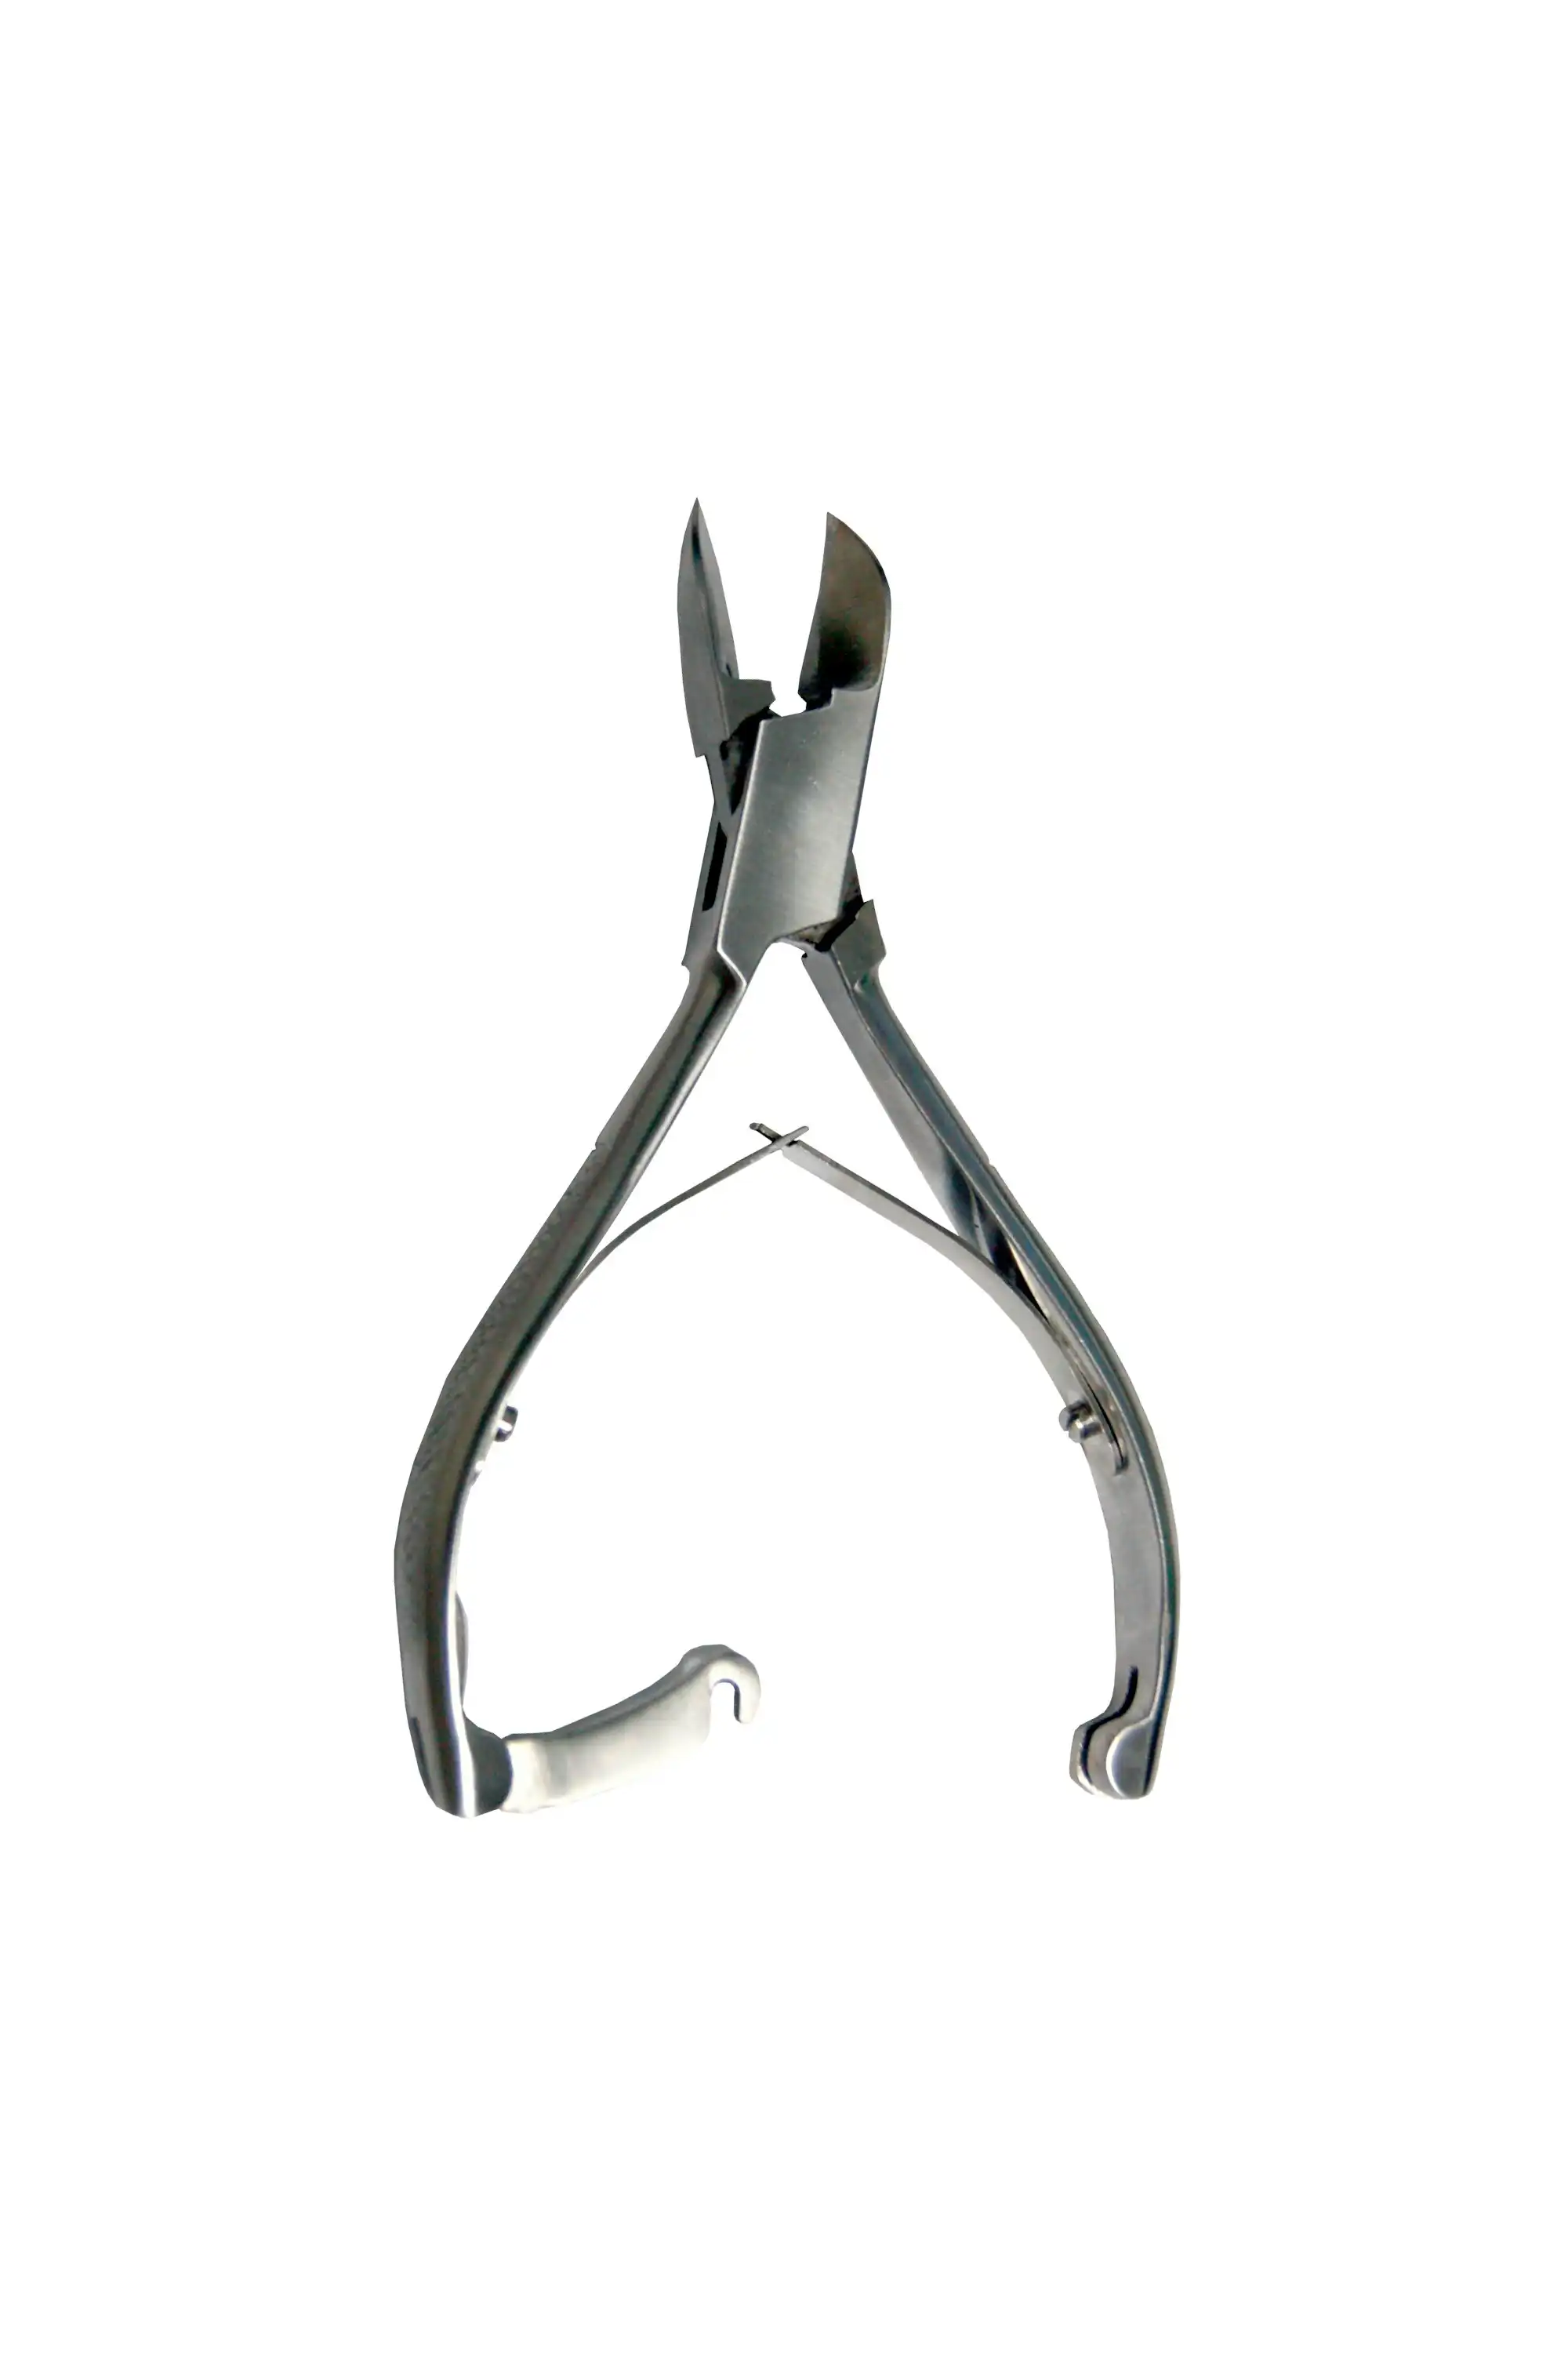 Livingstone Bone Cutter or Nail Clipper 145mm Long 20mm Curved Jaw Serrated Handle with Lock Two Arms 127g